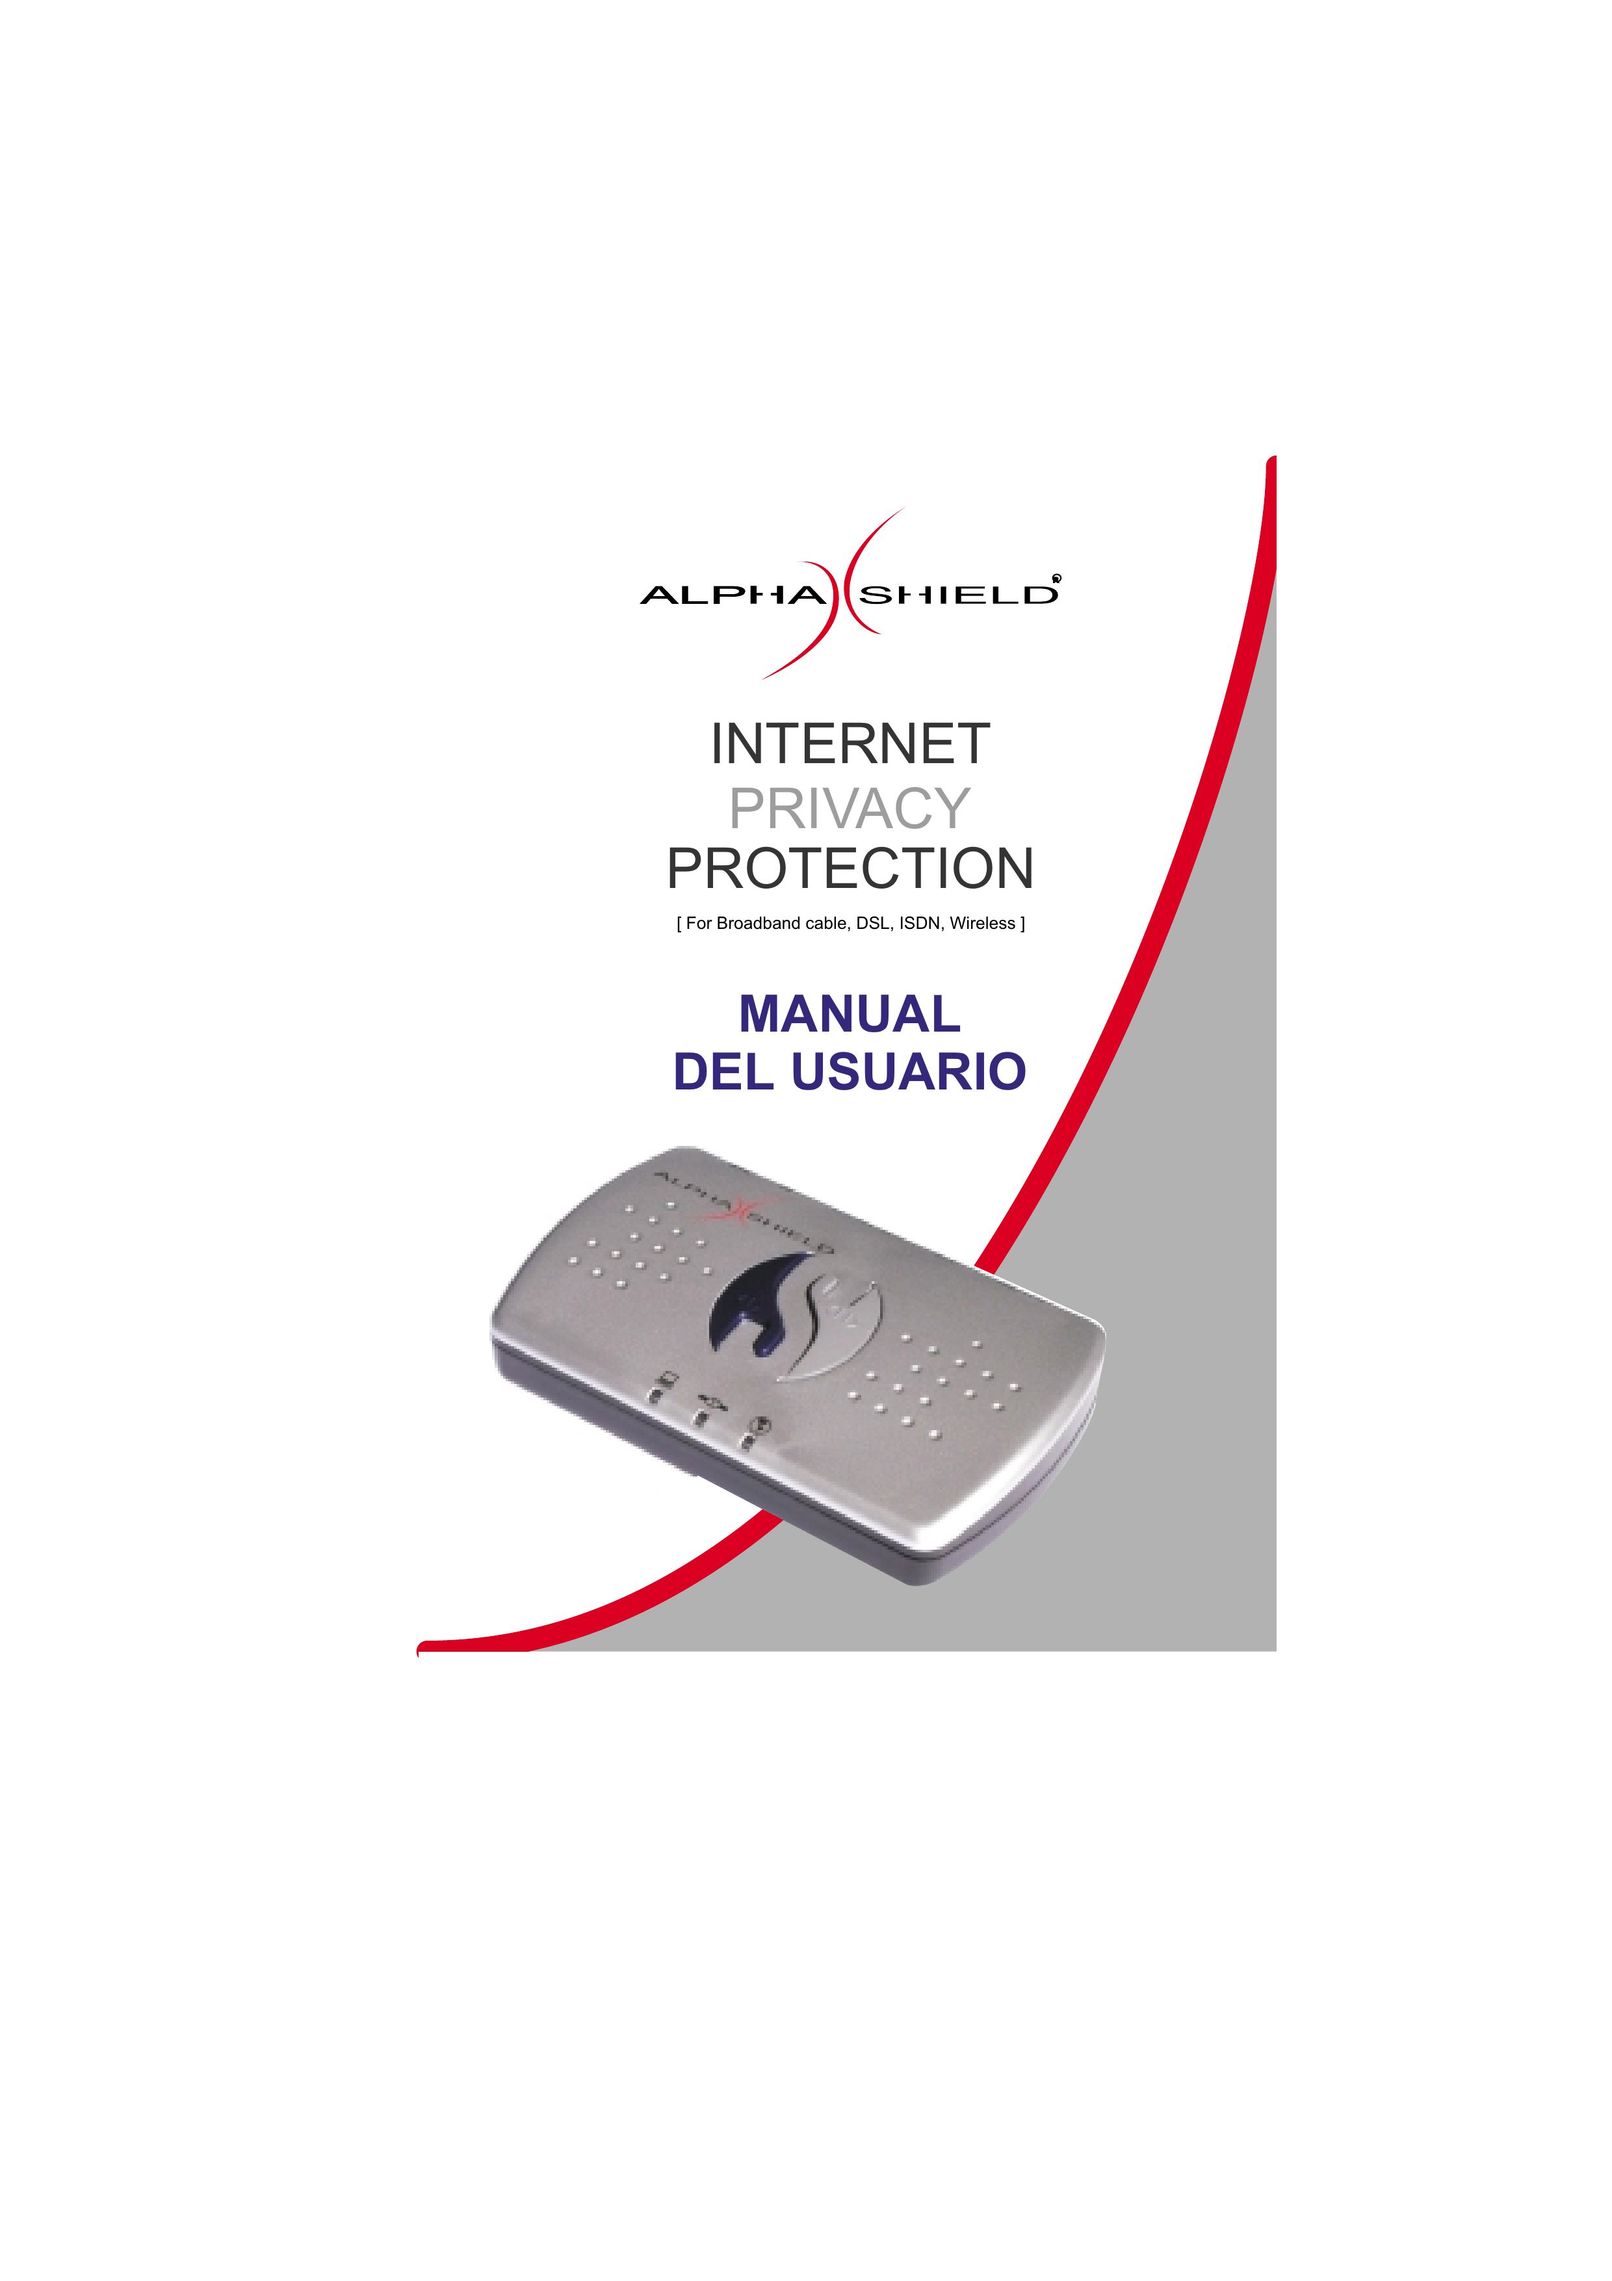 AlphaShield INTERNET PRIVACY PROTECTION Network Card User Manual